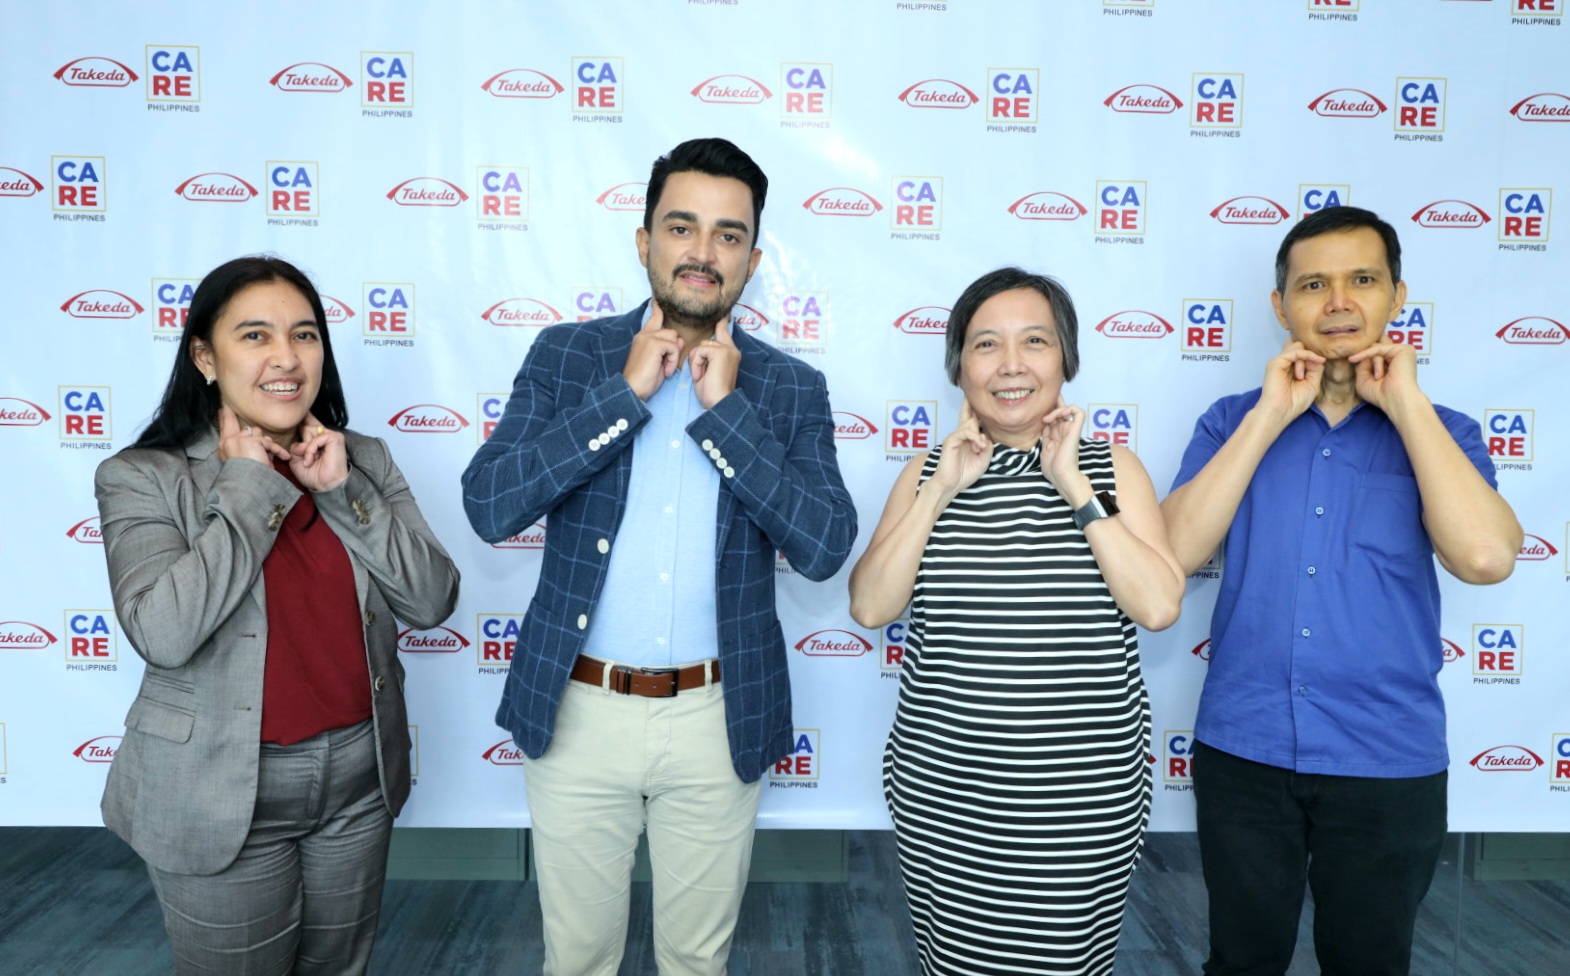 Representatives from Takeda Philippines and Care PH doing the symbolic gesture of Takeda’s Spot Lymphoma, Stop Lymphoma campaign. (From left to right) Loreann Villanueva, Country Manager, Takeda Philippines; Igor Gomes, Cluster Head and General Manager, VMAPS; Dr. Beatrice Tiangco, Founder of Care PH; and Mr. Jojo Flores, Program and Administrative Officer of Care PH